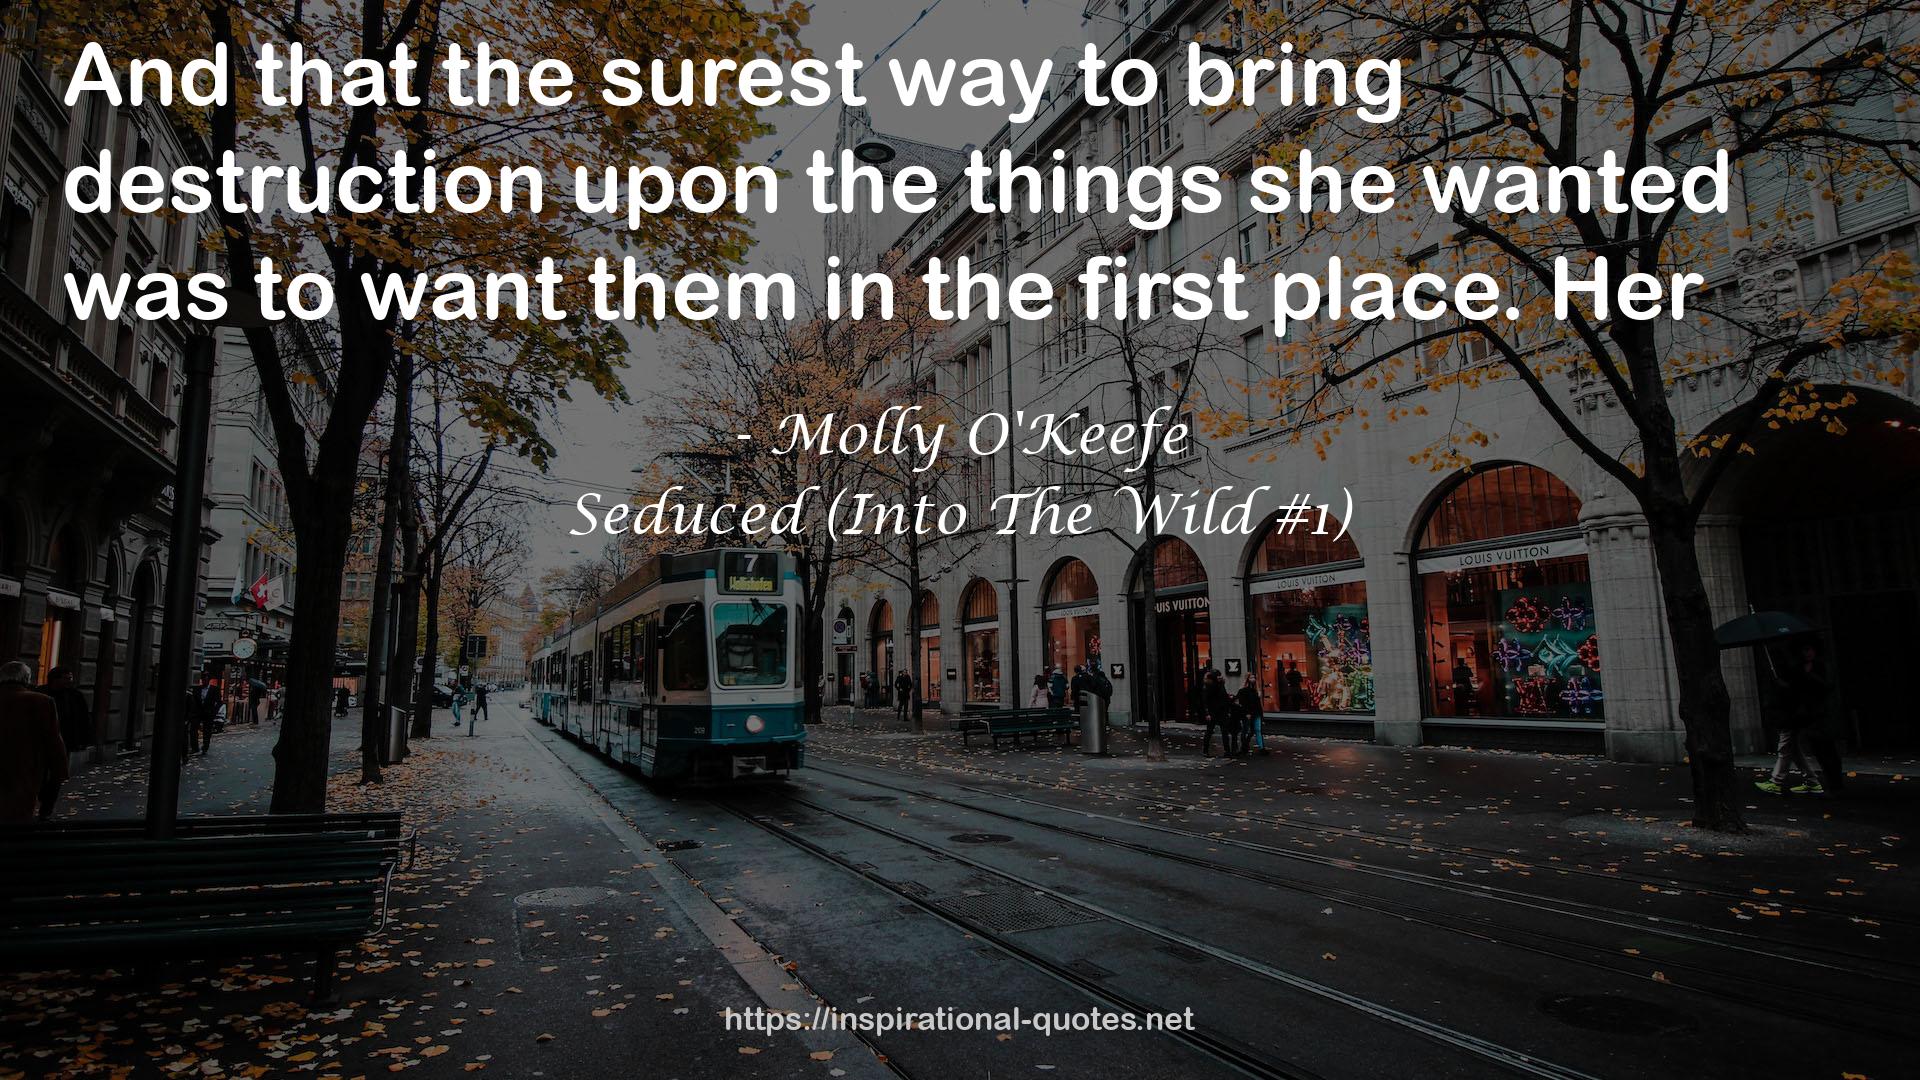 Seduced (Into The Wild #1) QUOTES